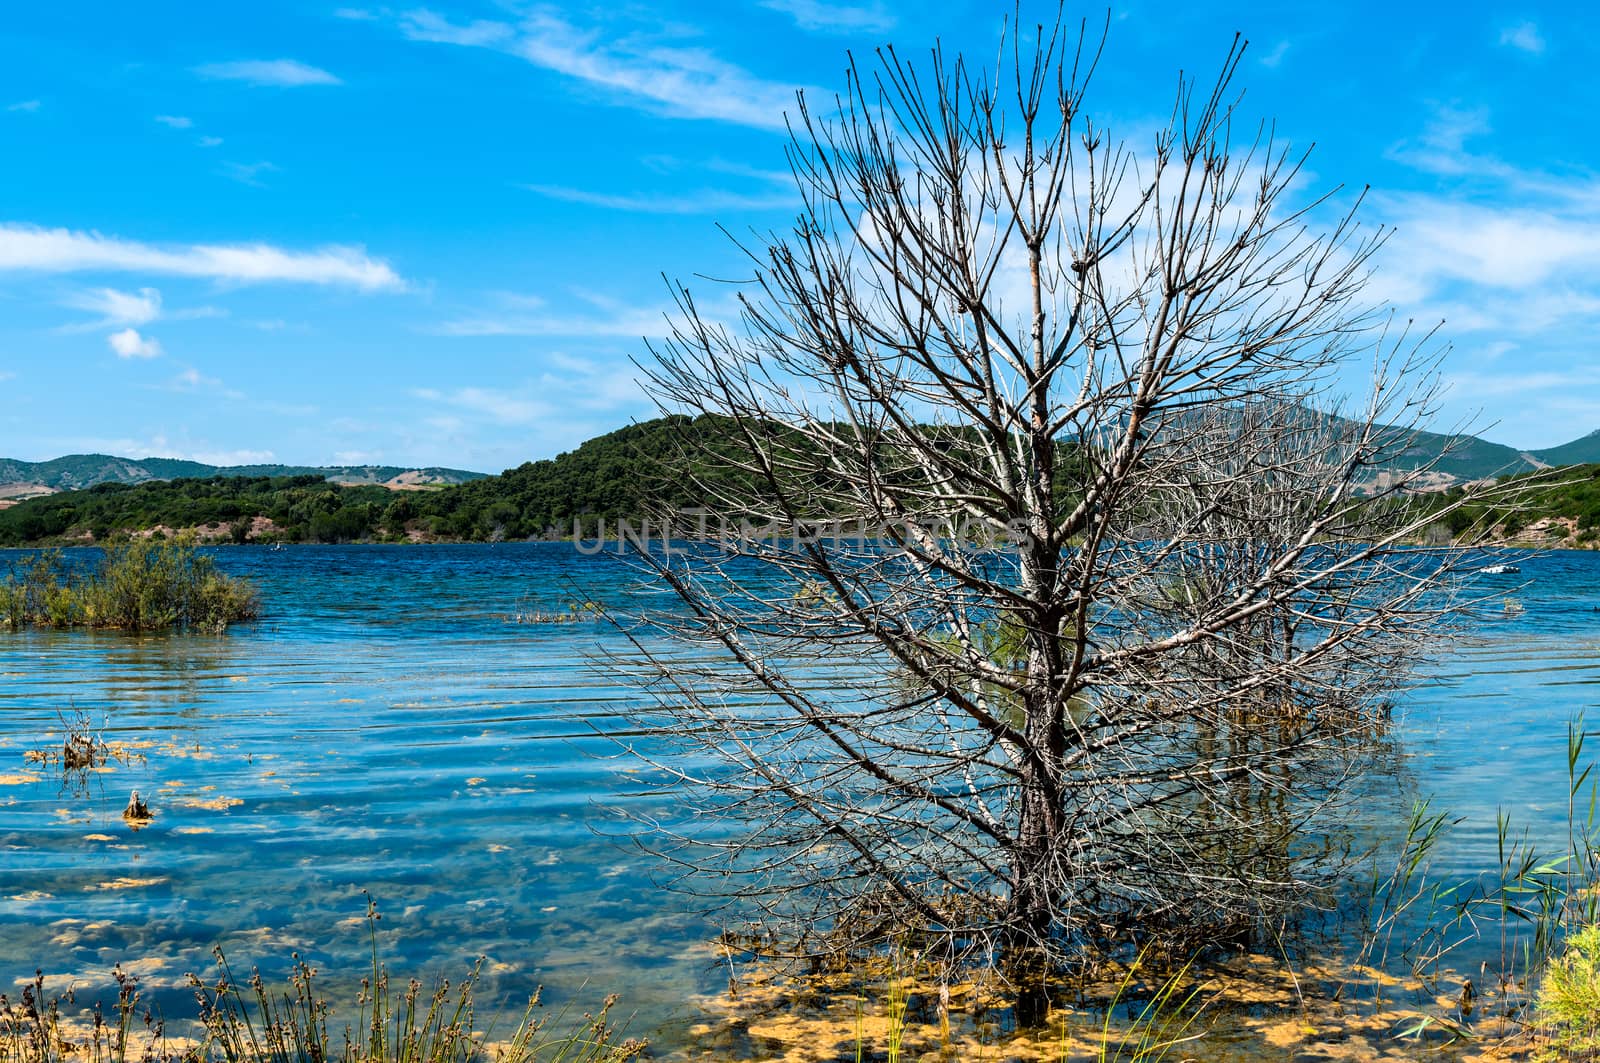 Landscape of a lake in the summer, with clear water and a bare tree